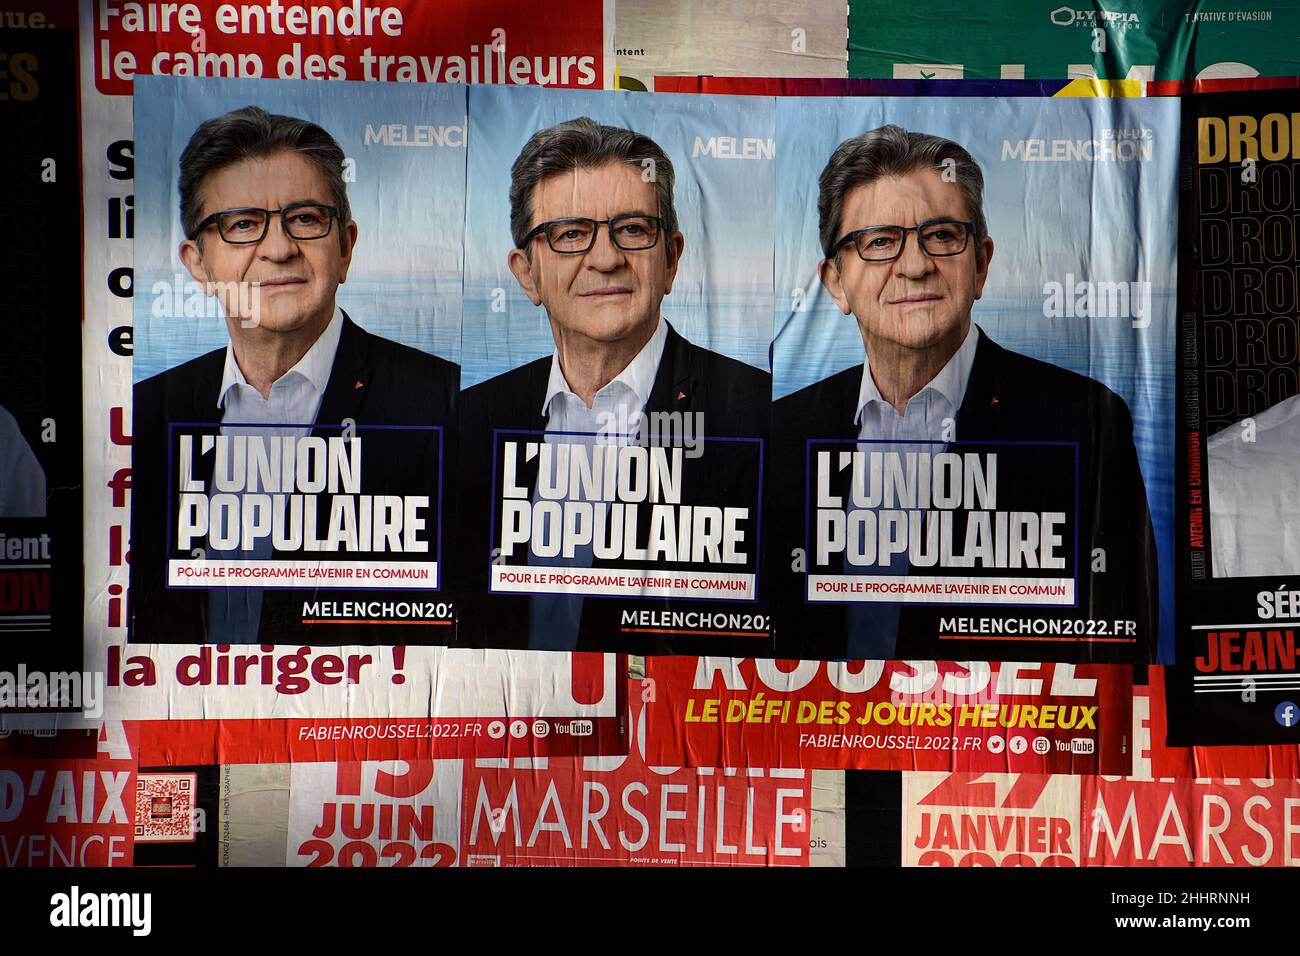 Marseille, France. 25th Jan, 2022. Posters of Jean-Luc Mélenchon are seen on display.Posters campaign of Nathalie Arthaud, Fabien Roussel, Philippe Poutou and Jean-Luc Mélenchon, candidates for the French presidential elections of 2022. Credit: SOPA Images Limited/Alamy Live News Stock Photo